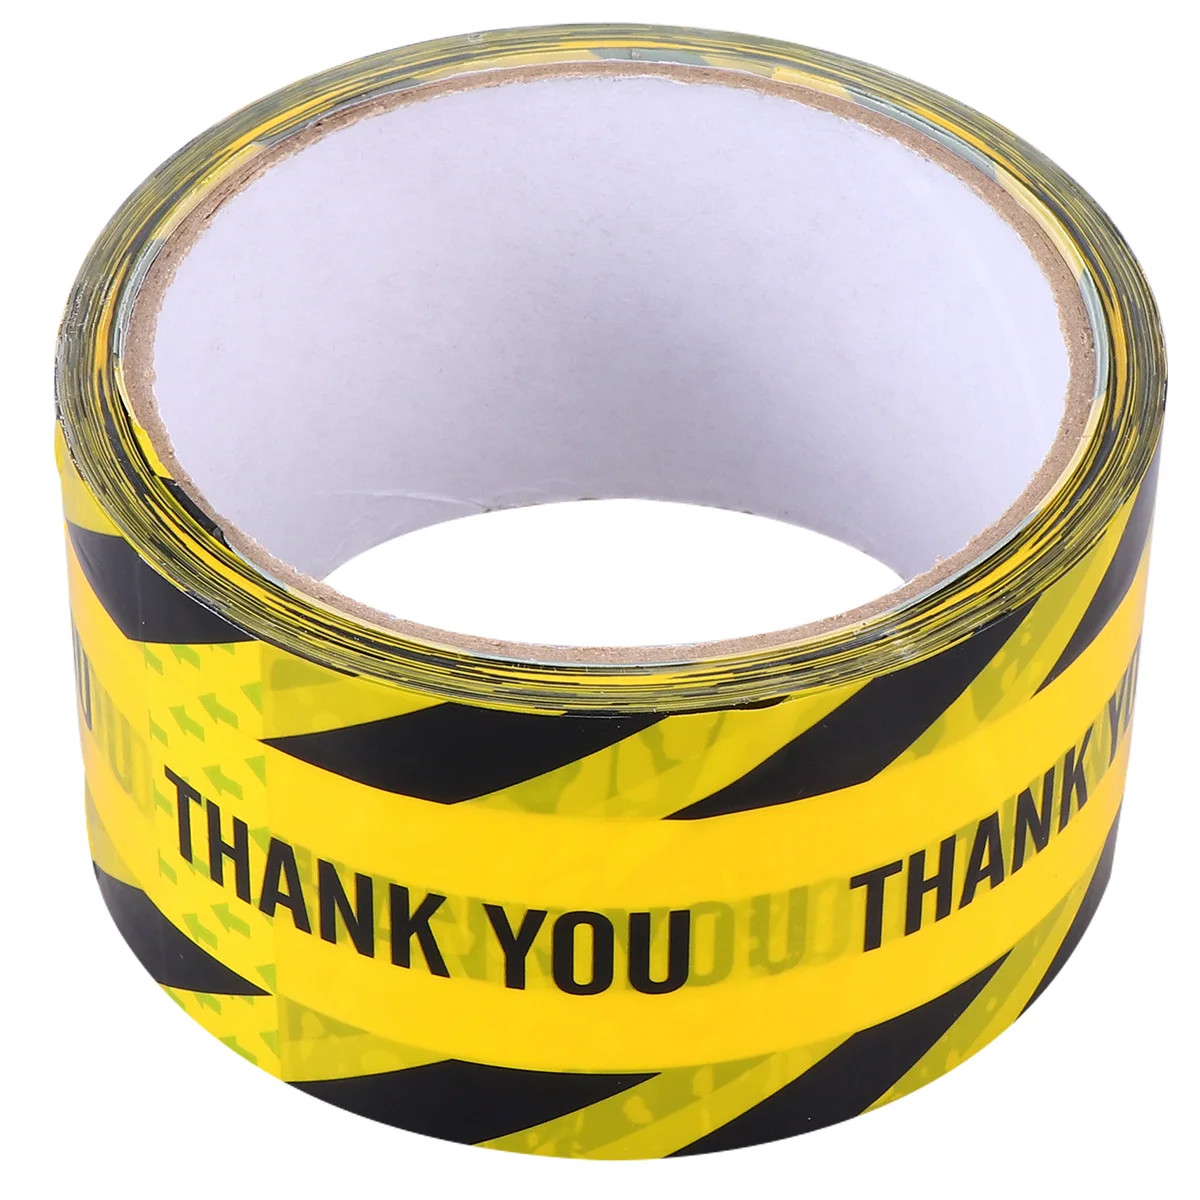 

1 Roll Thank You Safety Tape Safe Self Adhesive Sticker Warning Tape Masking Tape Safety Stripes Tape for Walls Floors Pipes